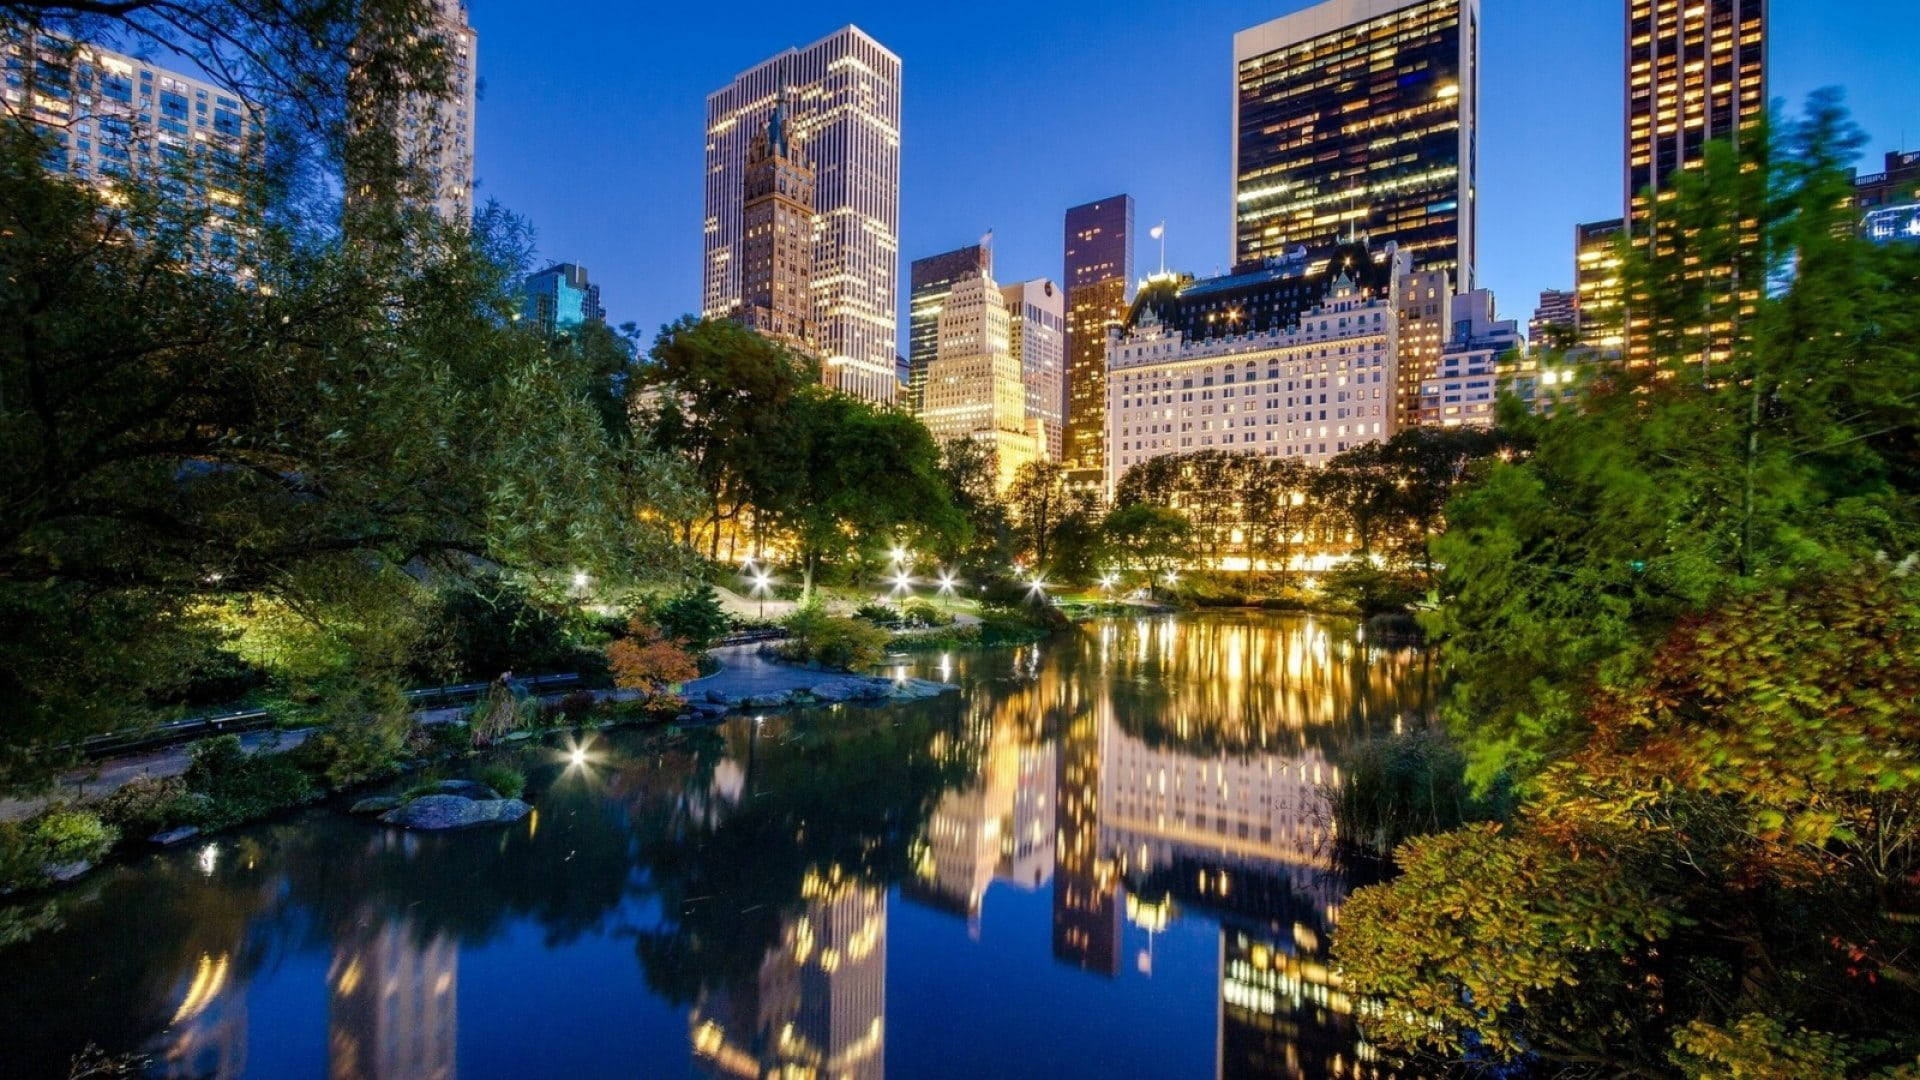 Central Park Lake New York Night Iphone Wallpaper